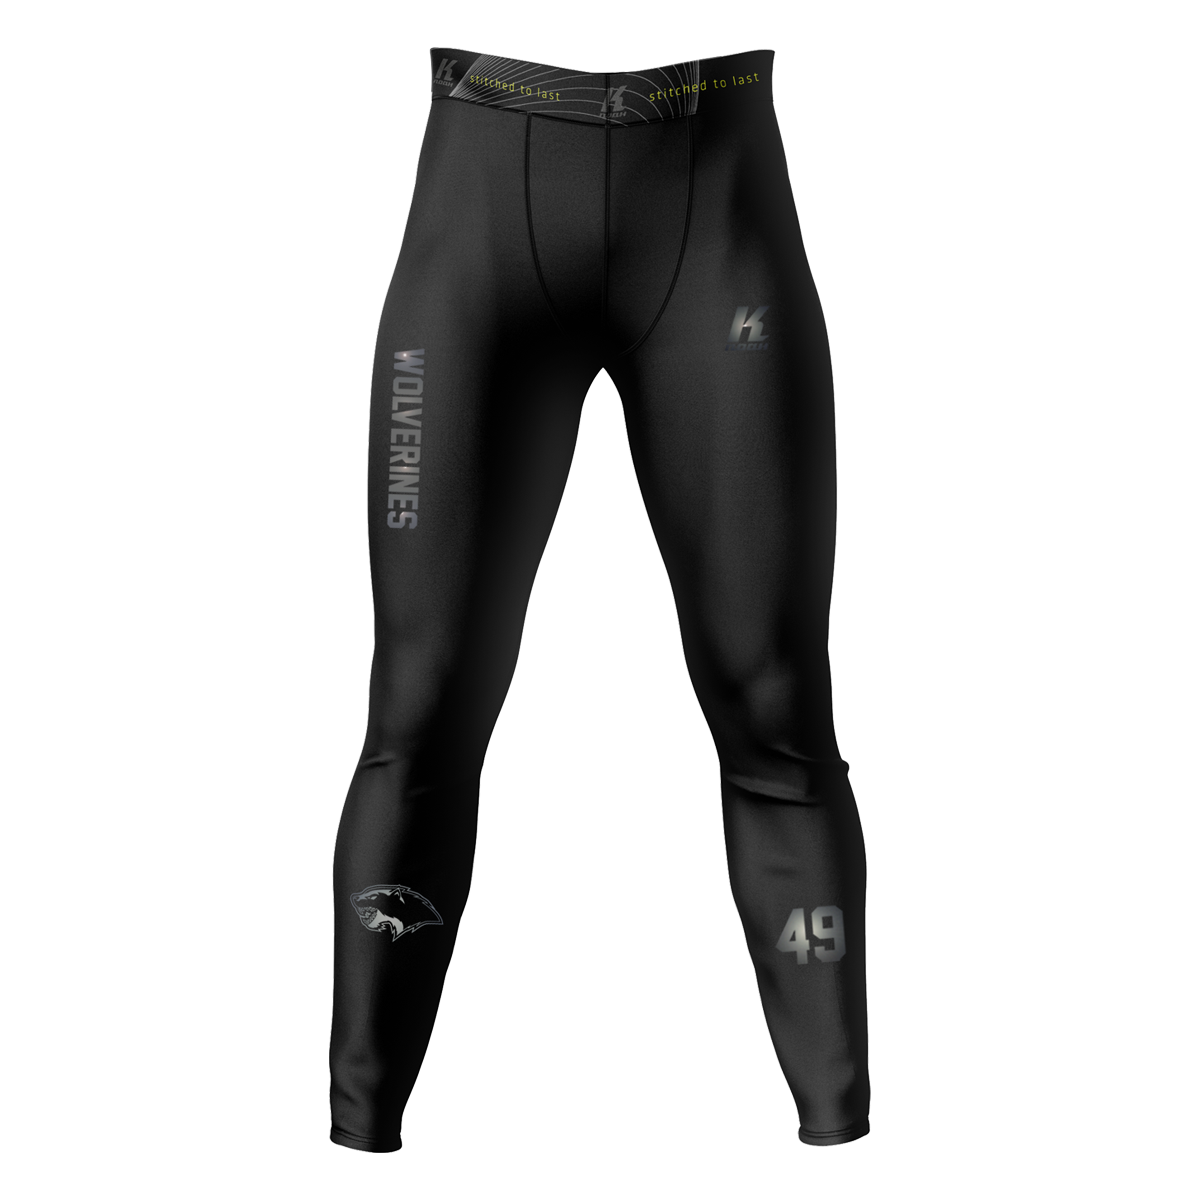 Wolverines "Blackline" K.Tech Fiber Compression Pant BA0514 with Playernumber/Initials